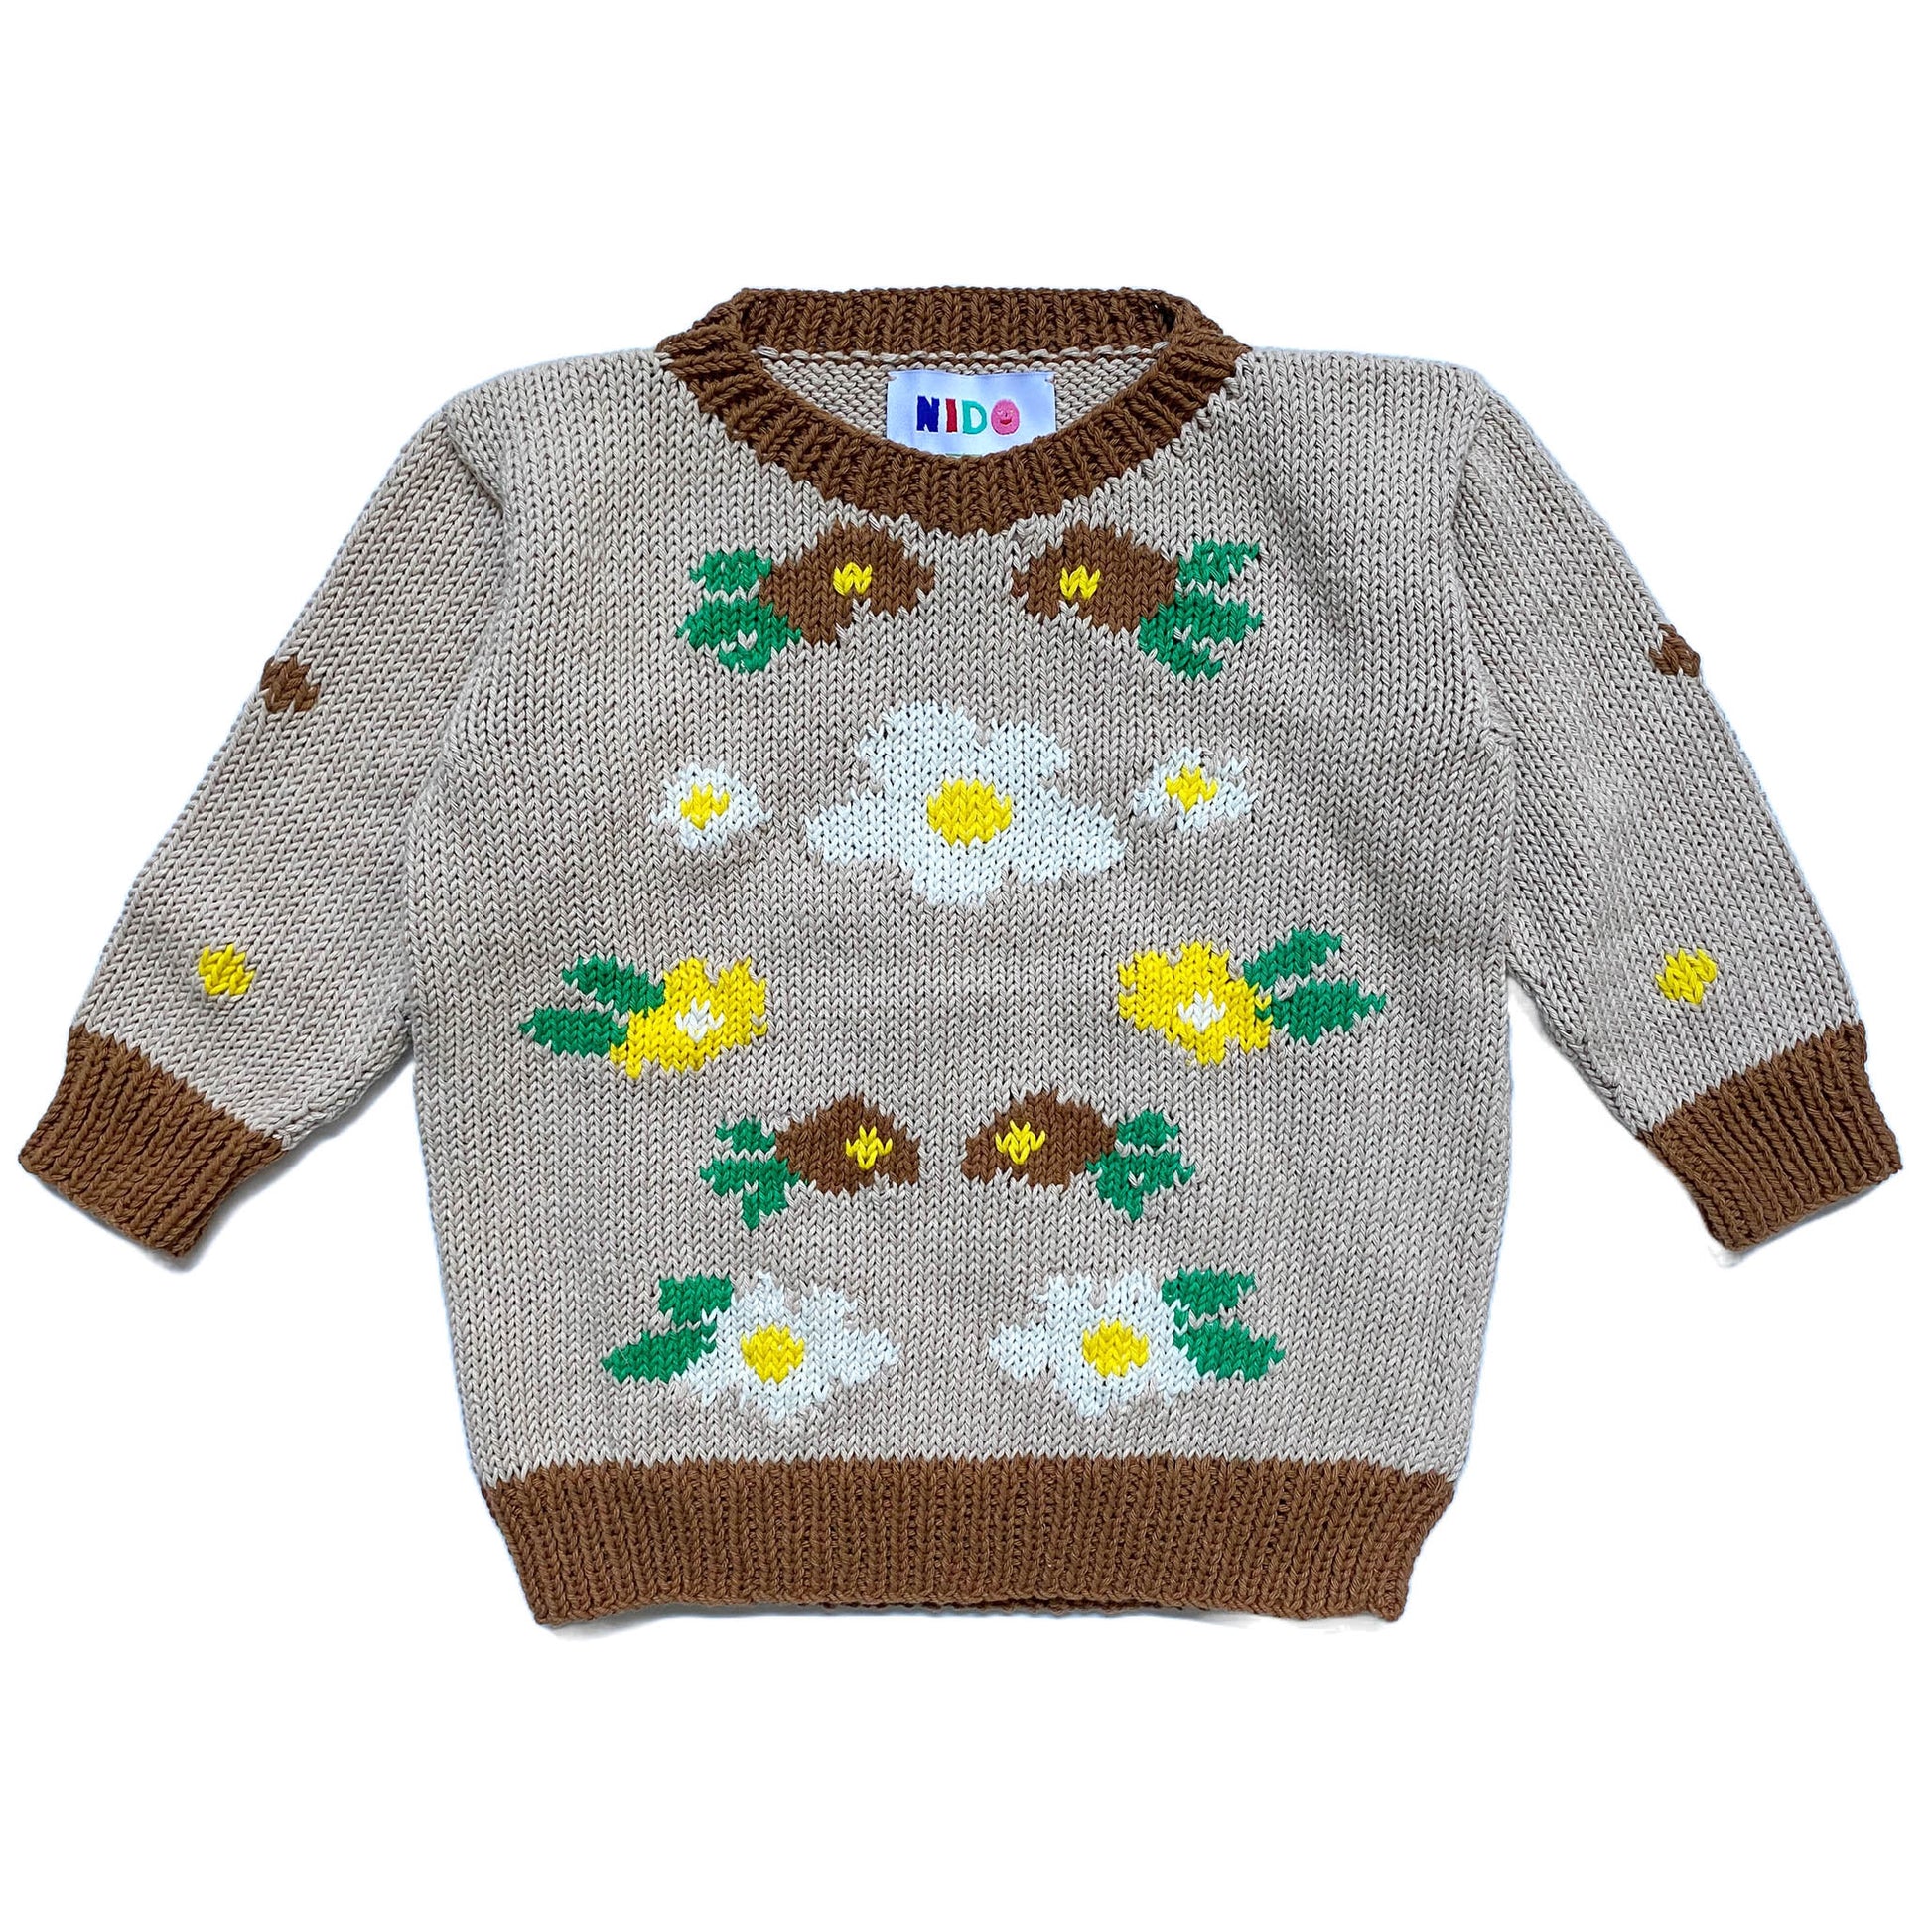 bloom sweater hand knitted for kids 